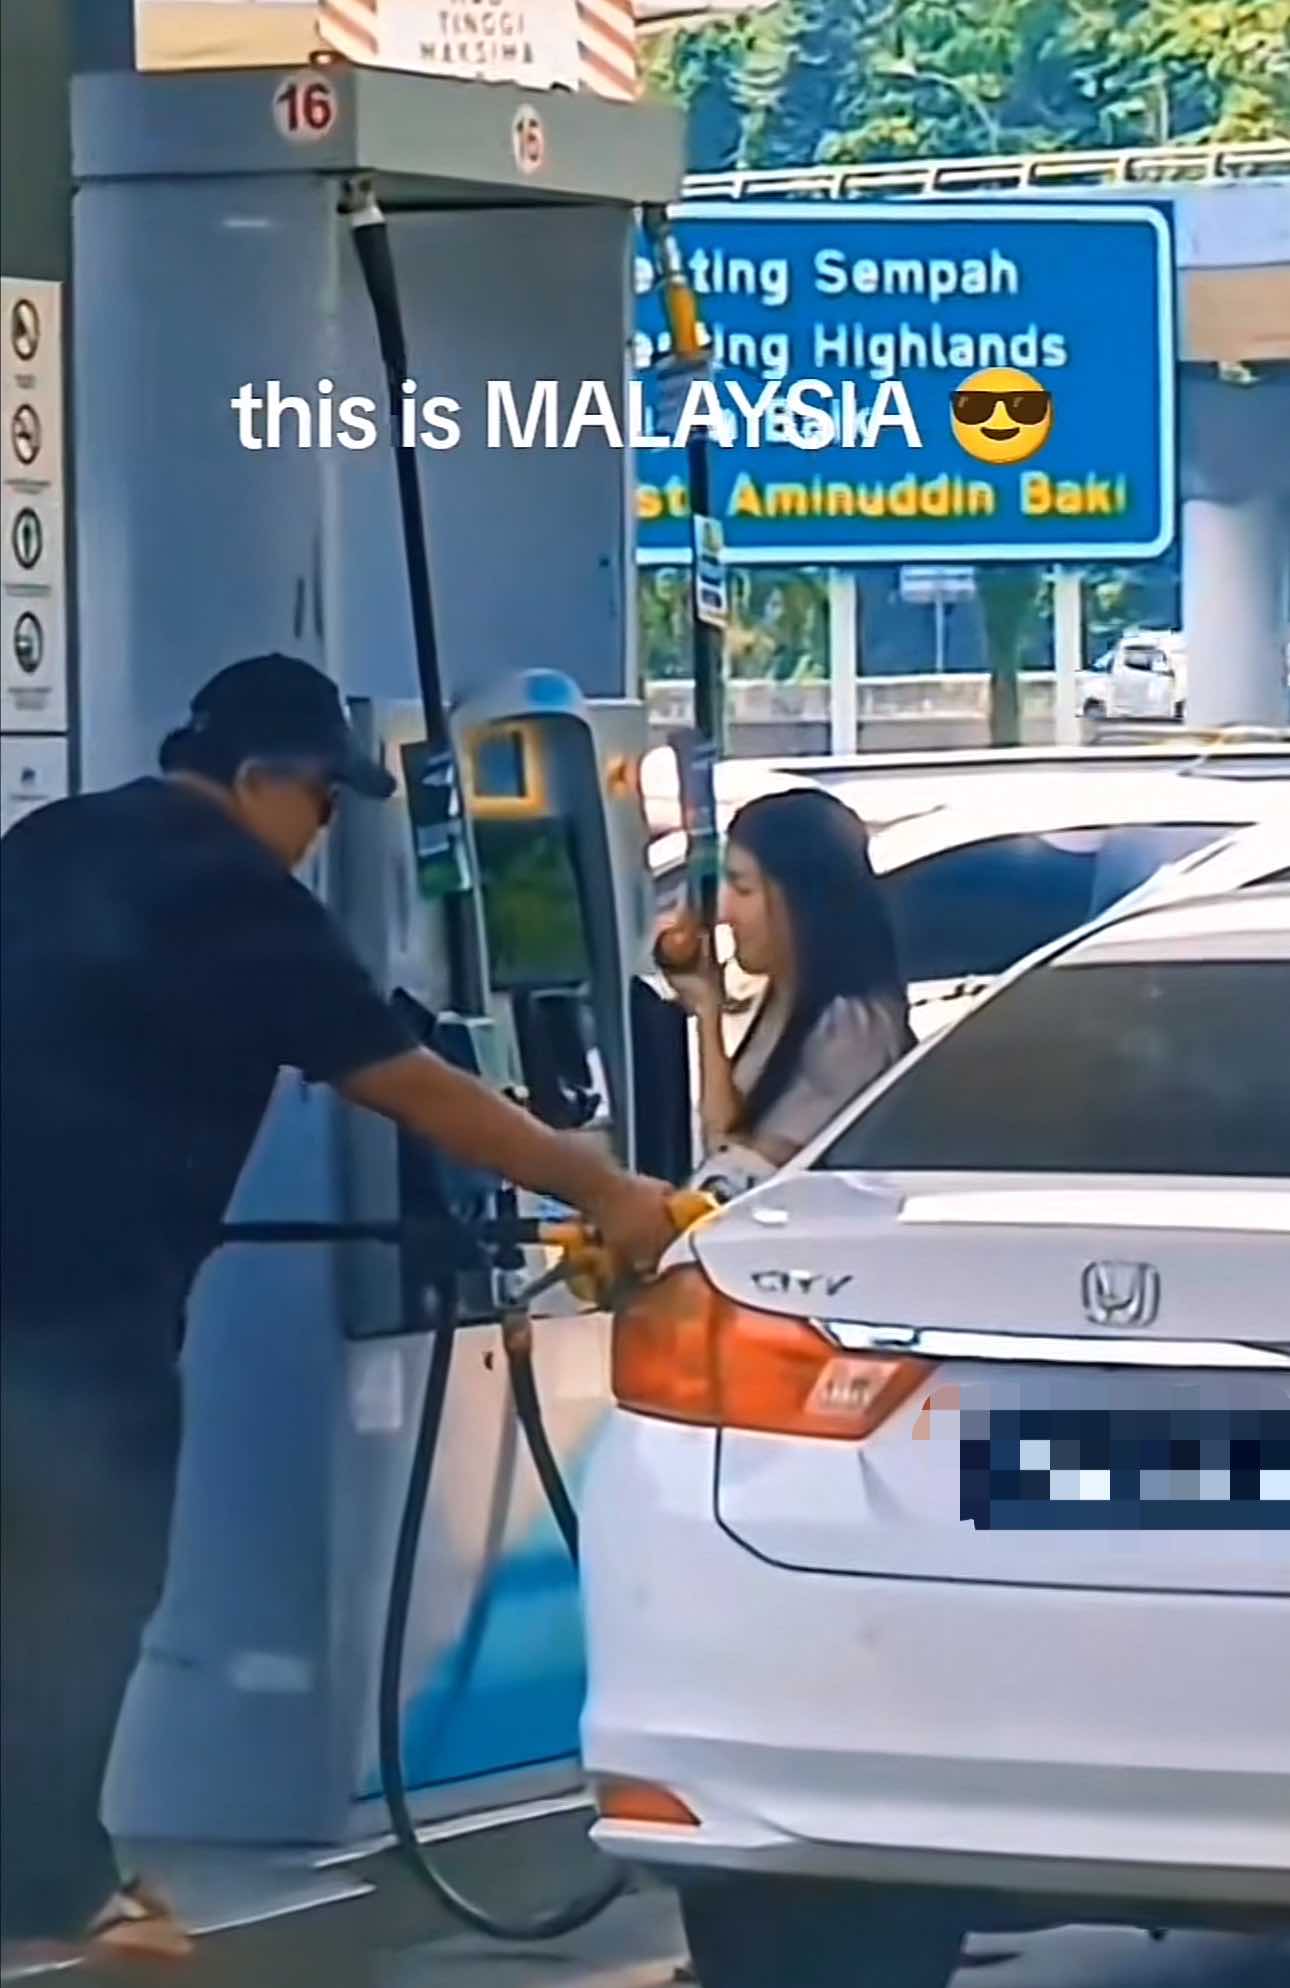 M'sian man gives remainder of his petrol to another driver, gets praised for his generosity